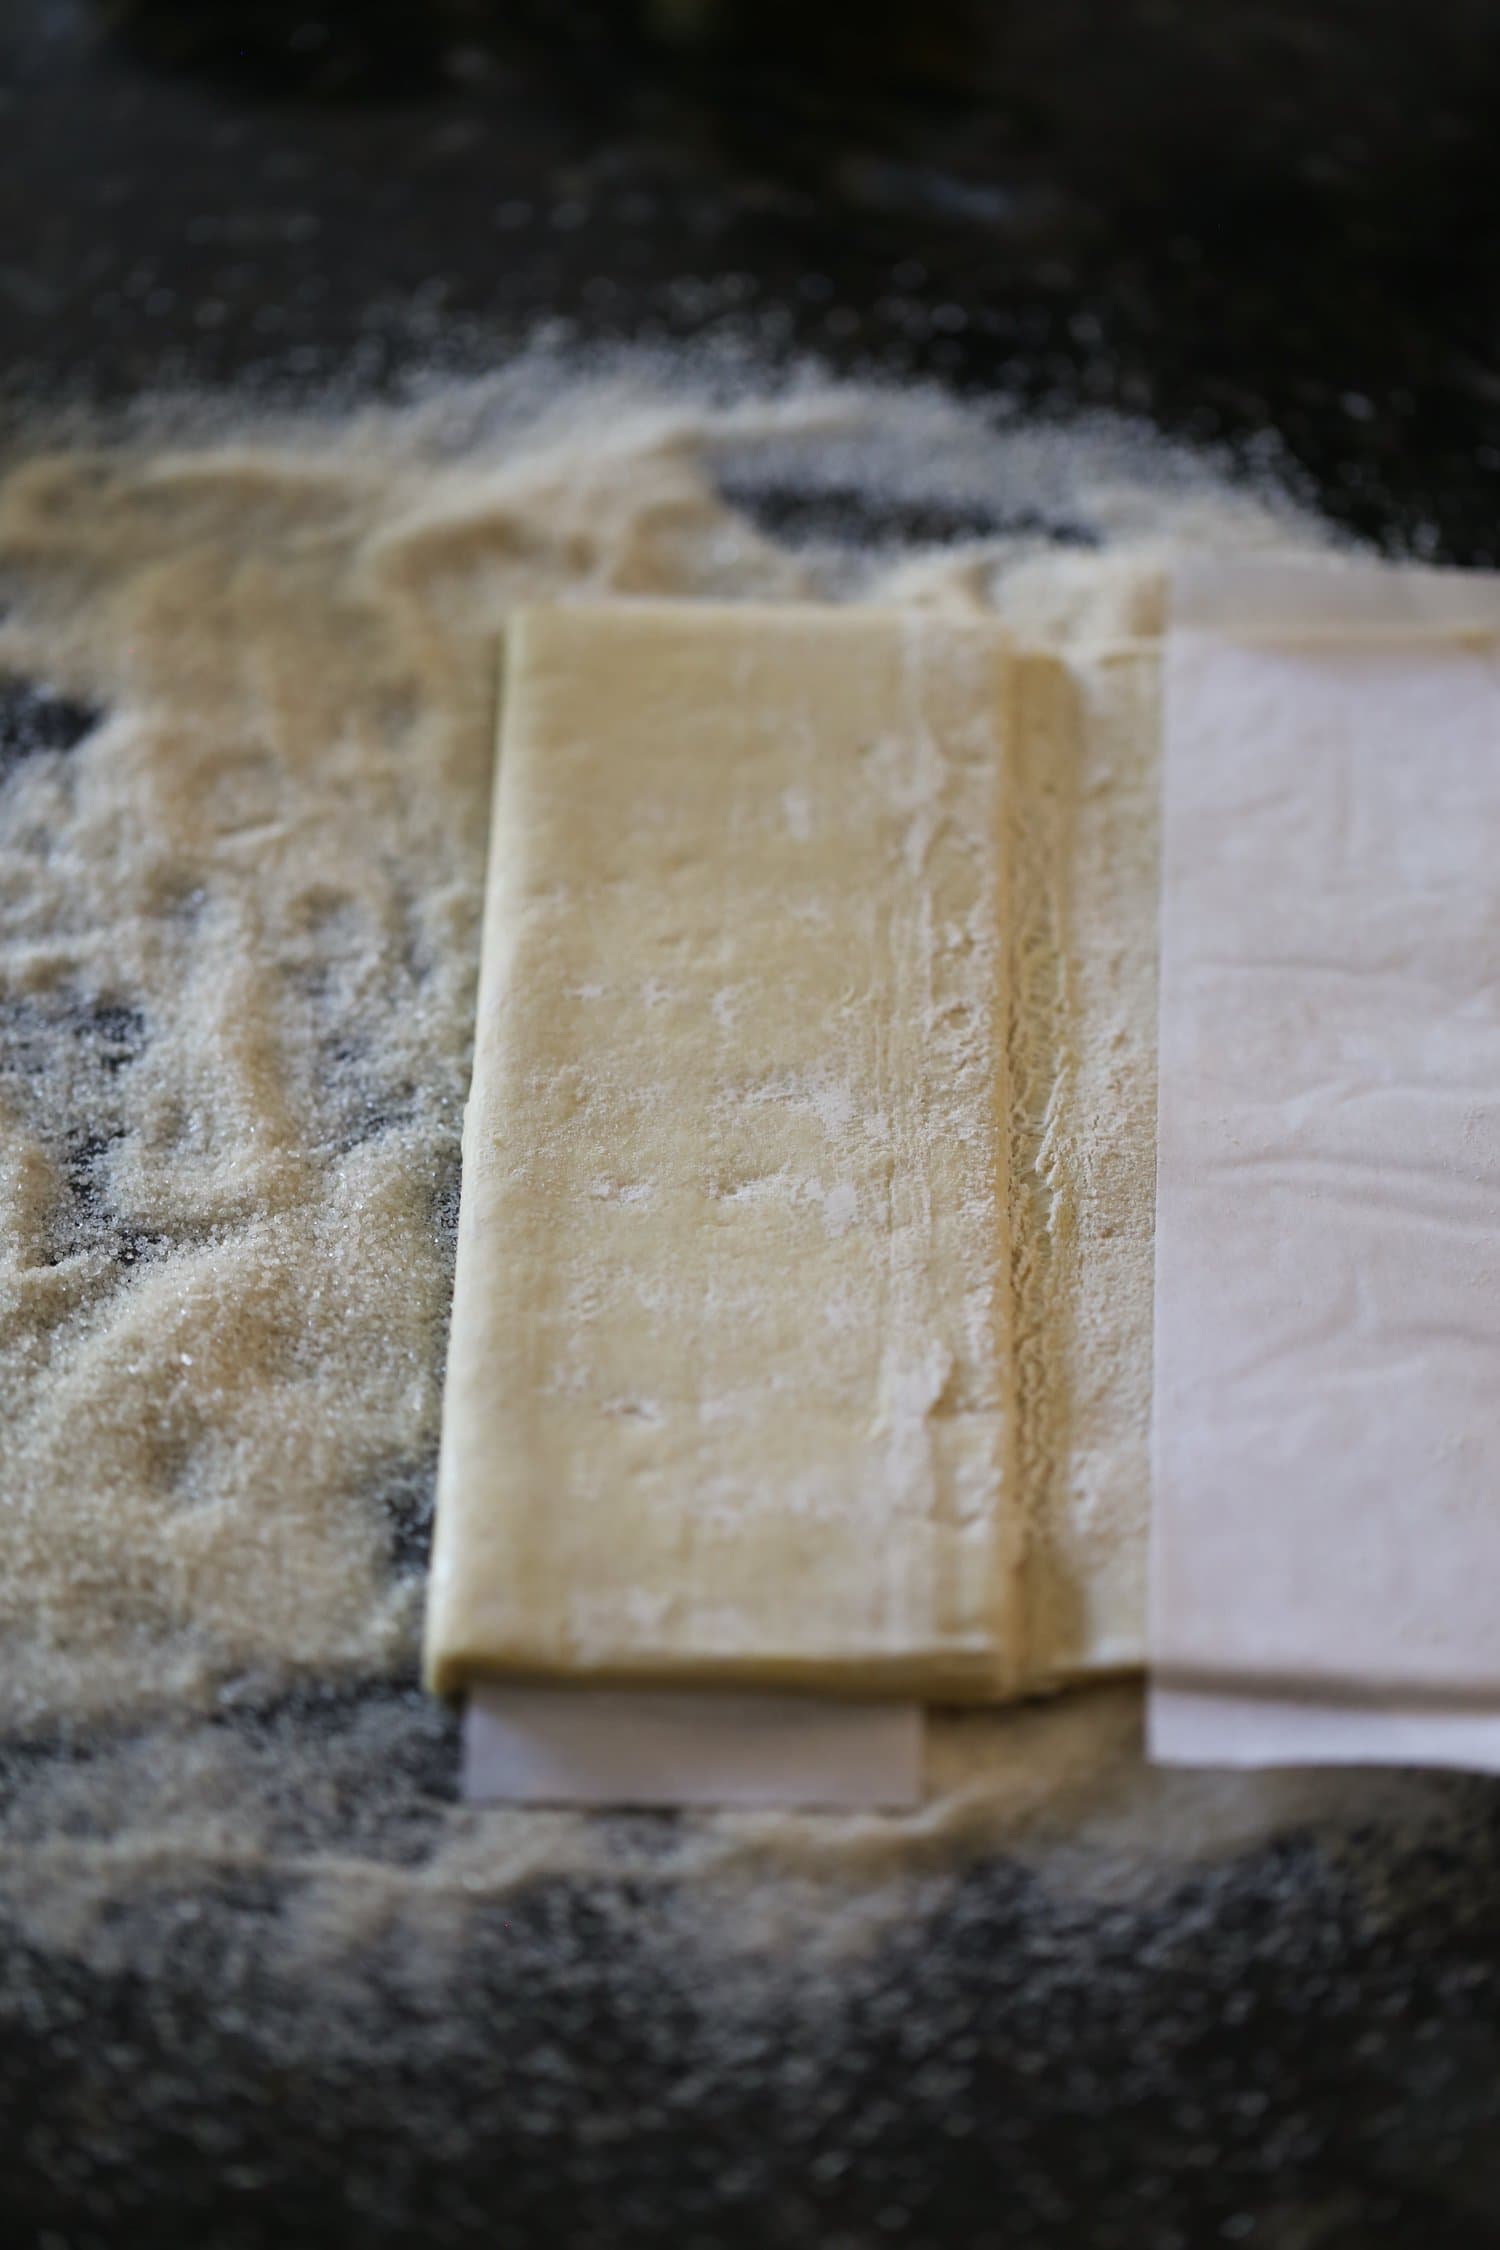 Folding Palmiers Dough Step 2: Thawed puff pastry is partially unfolded onto a sugar coated countertop.